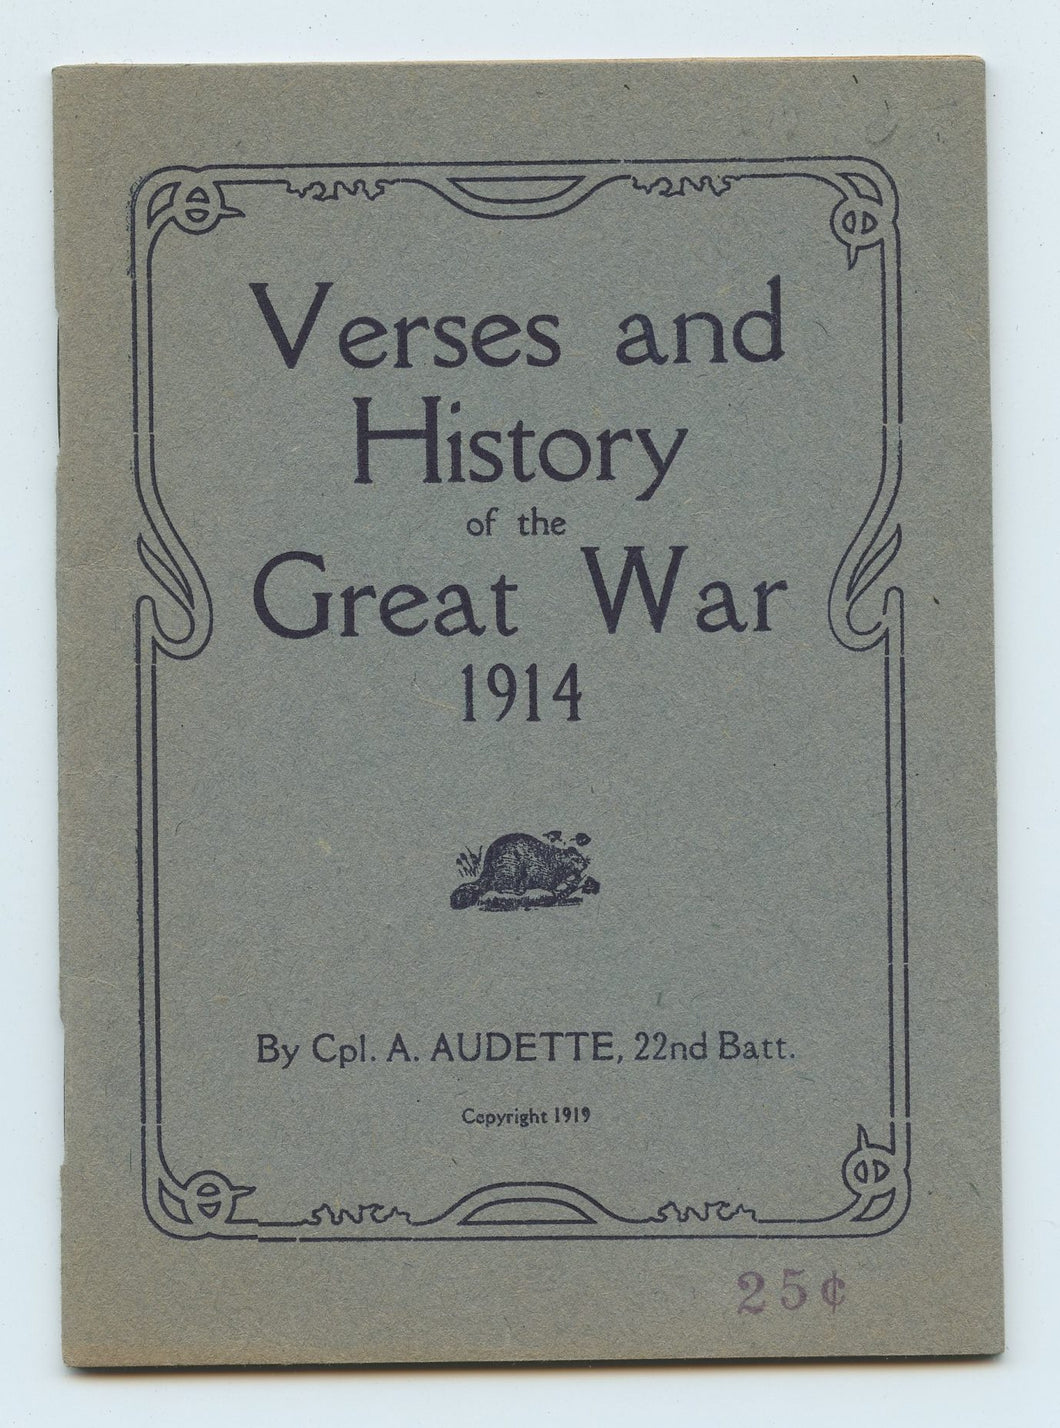 Verses and History of the Great War 1914